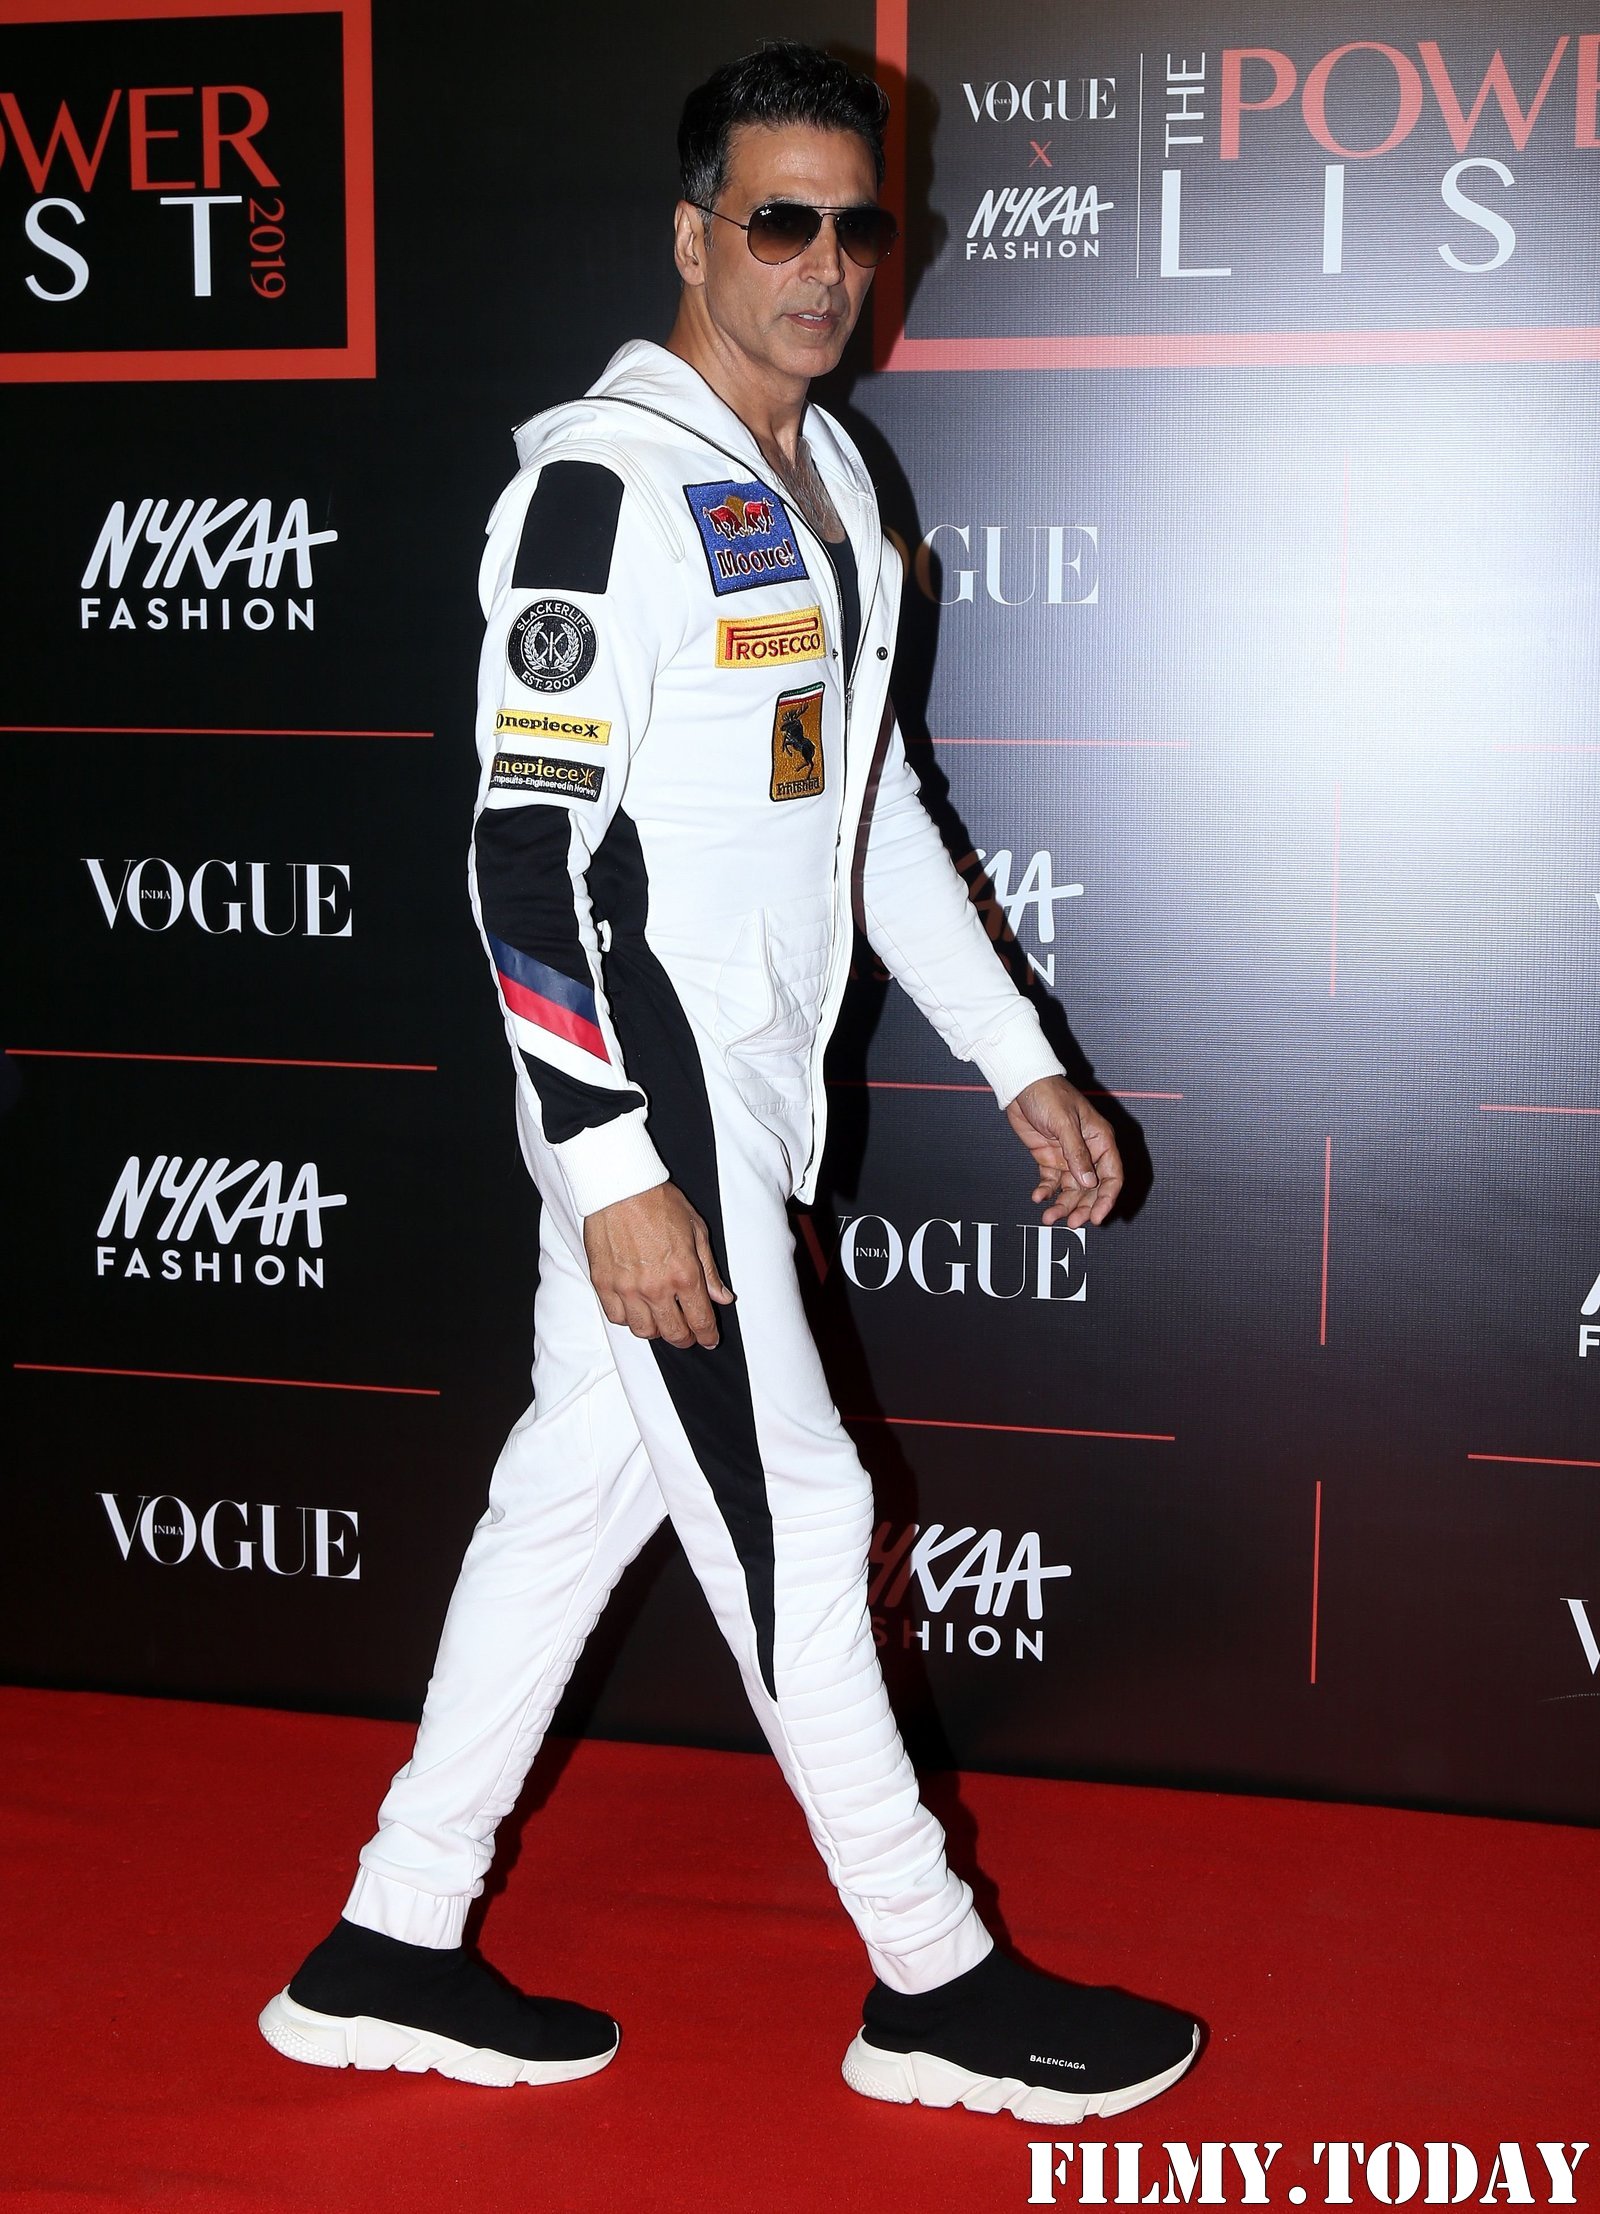 Akshay Kumar - Photos: Celebs At Vogue The Power List 2019 At St Regis Hotel | Picture 1706282